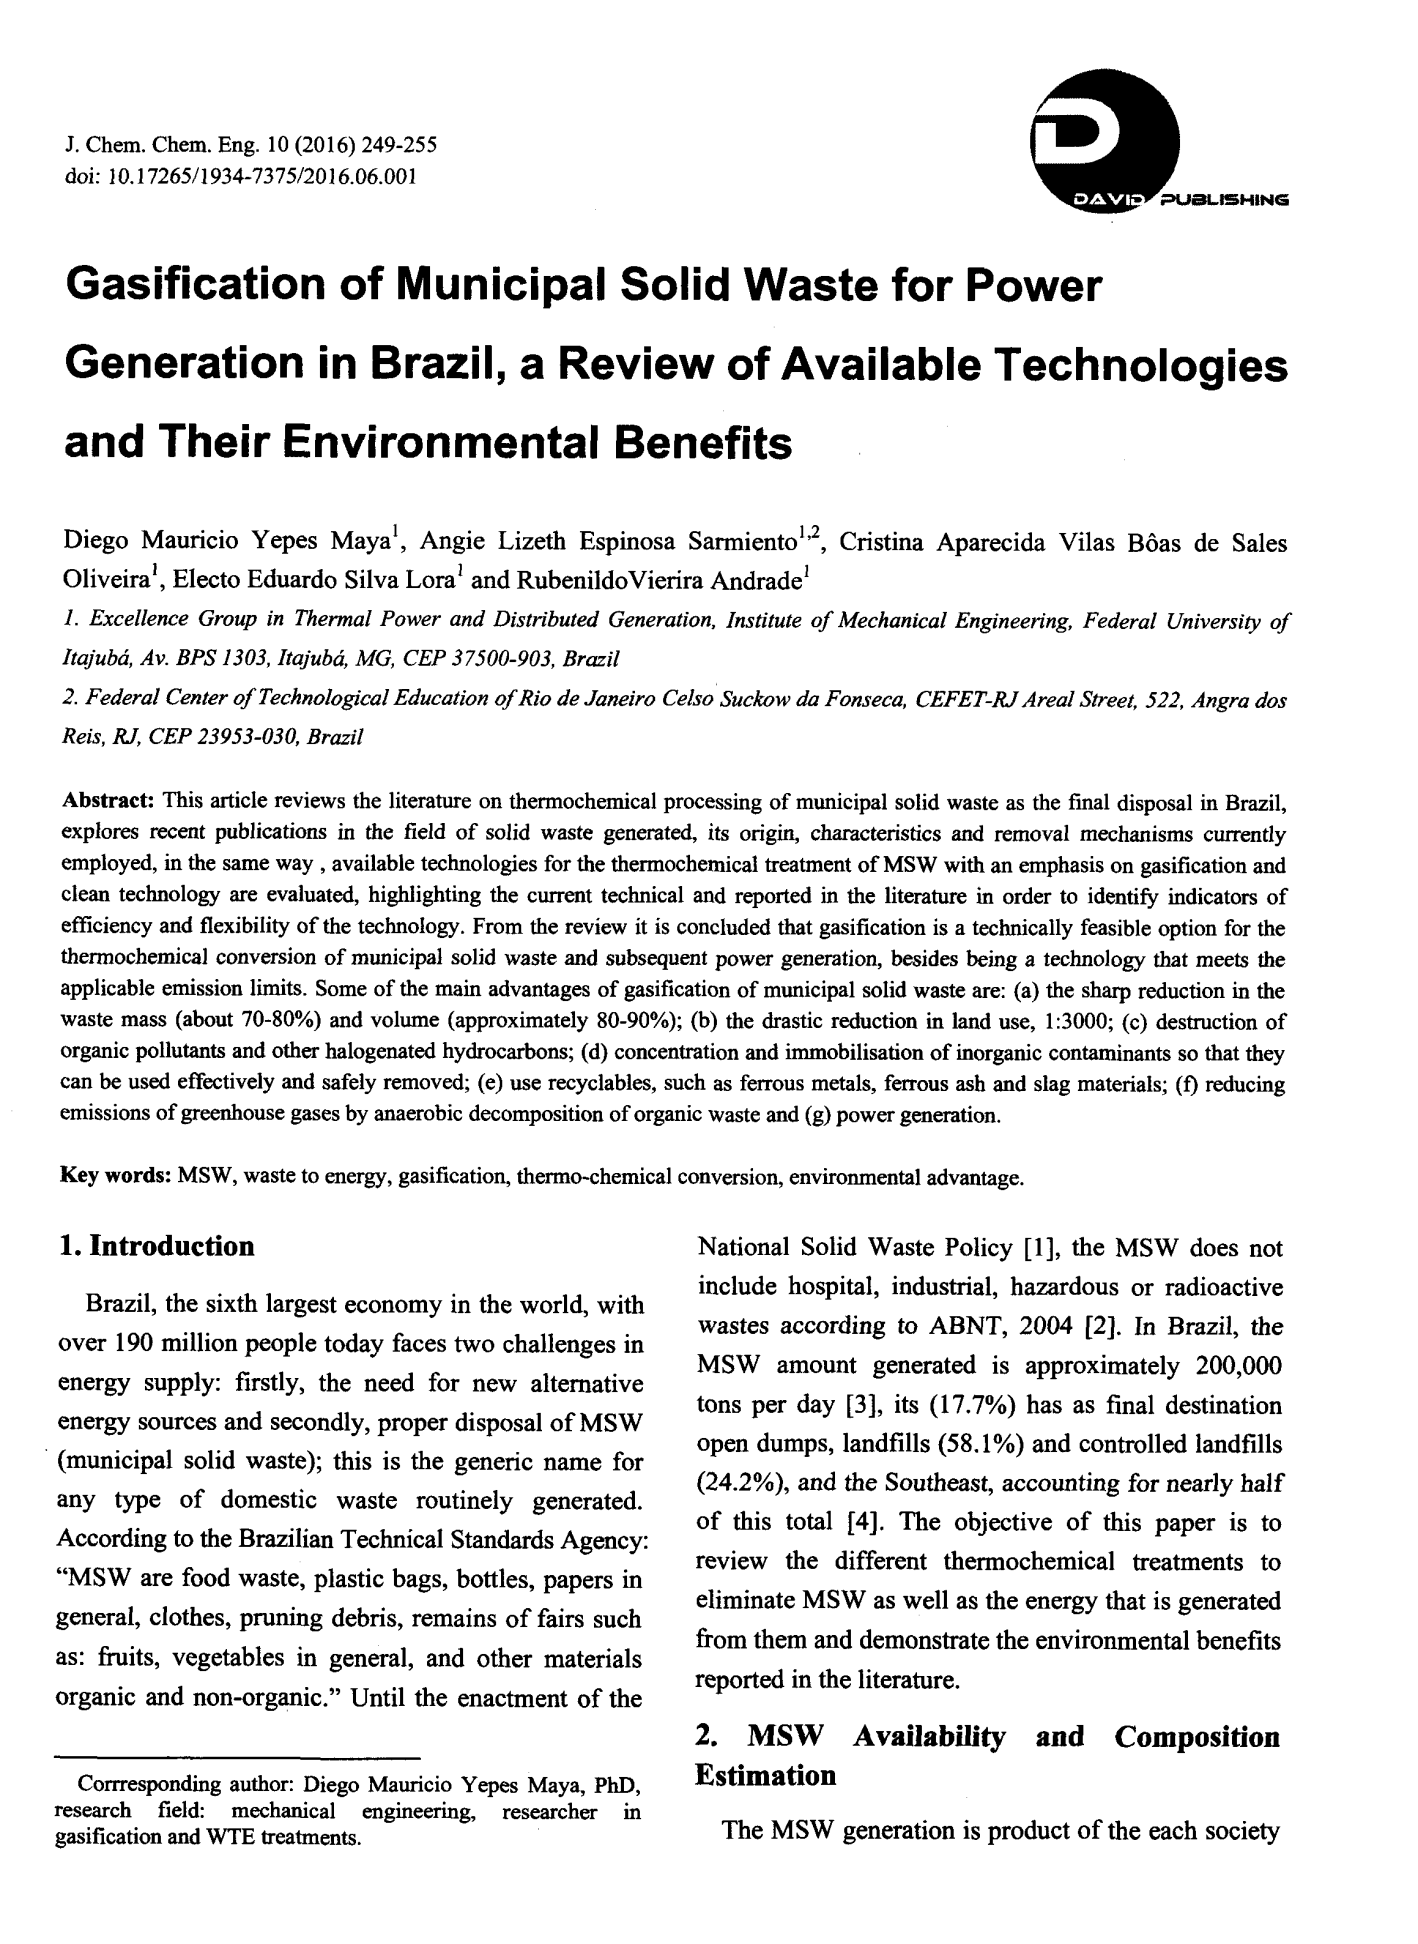 Gasification of Municipal Solid Waste for Power Generation in Brazil a Review of Available